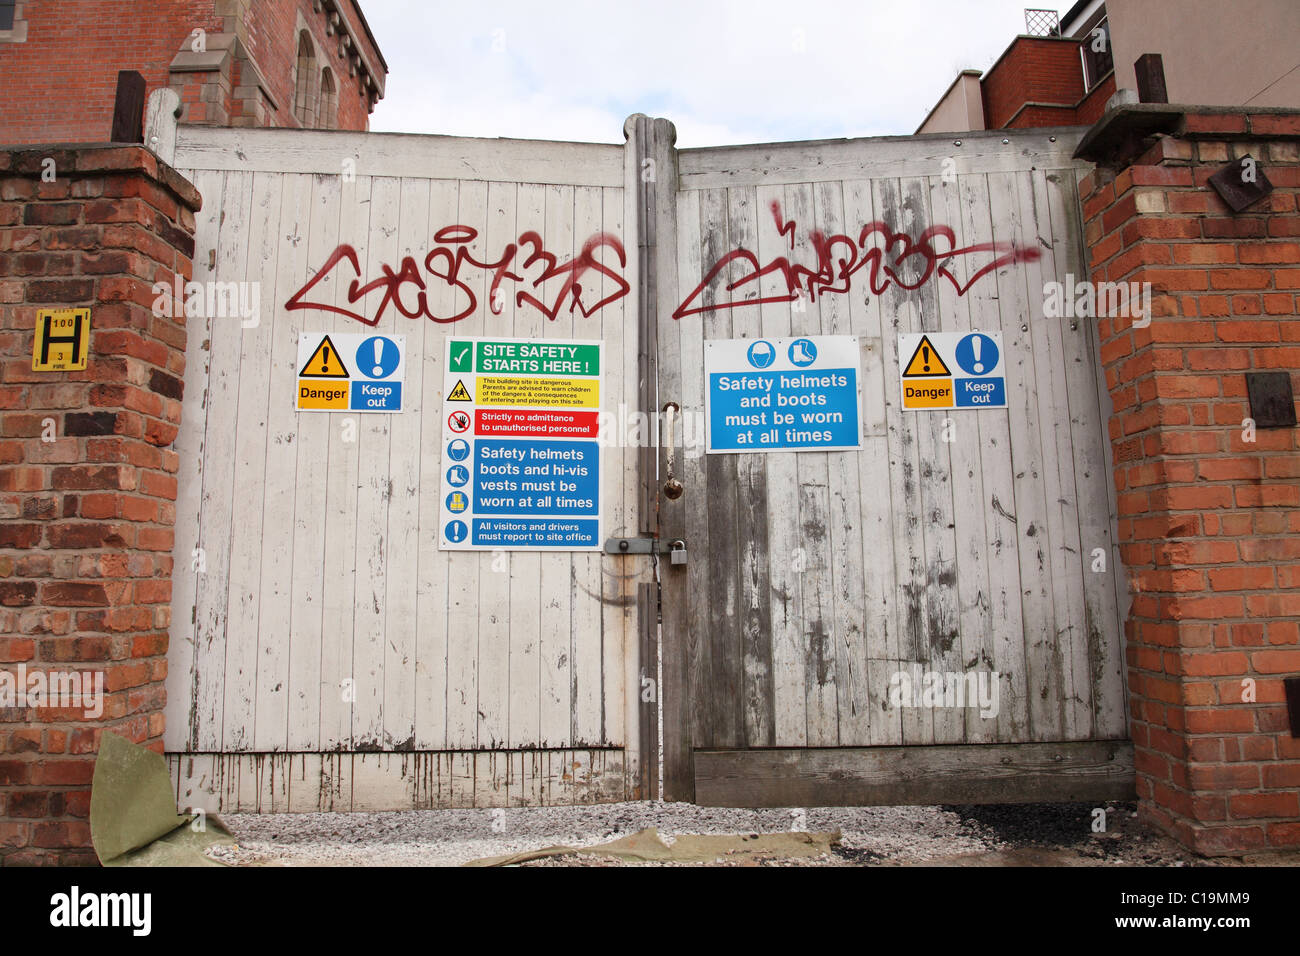 Health & Safety warning signs on a builders yard in a U.K. city. Stock Photo